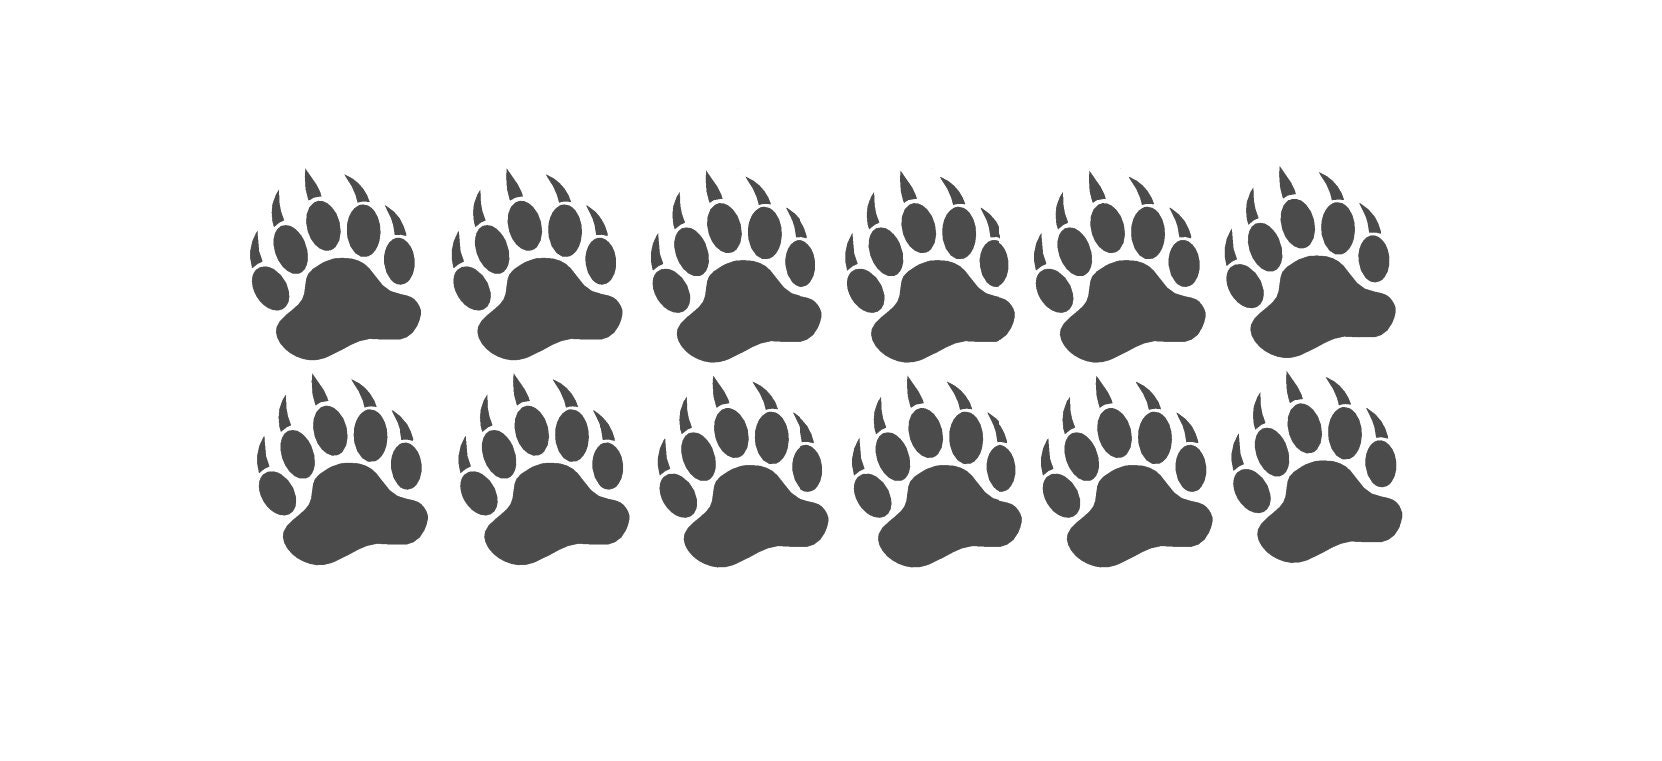 Bear Claw Paw Print - 7 inch - Car Truck Window Bumper Graphics Vinyl Sticker Decal - Nature Fishing Hiking Trails Wildlife Bears Wolves Deer